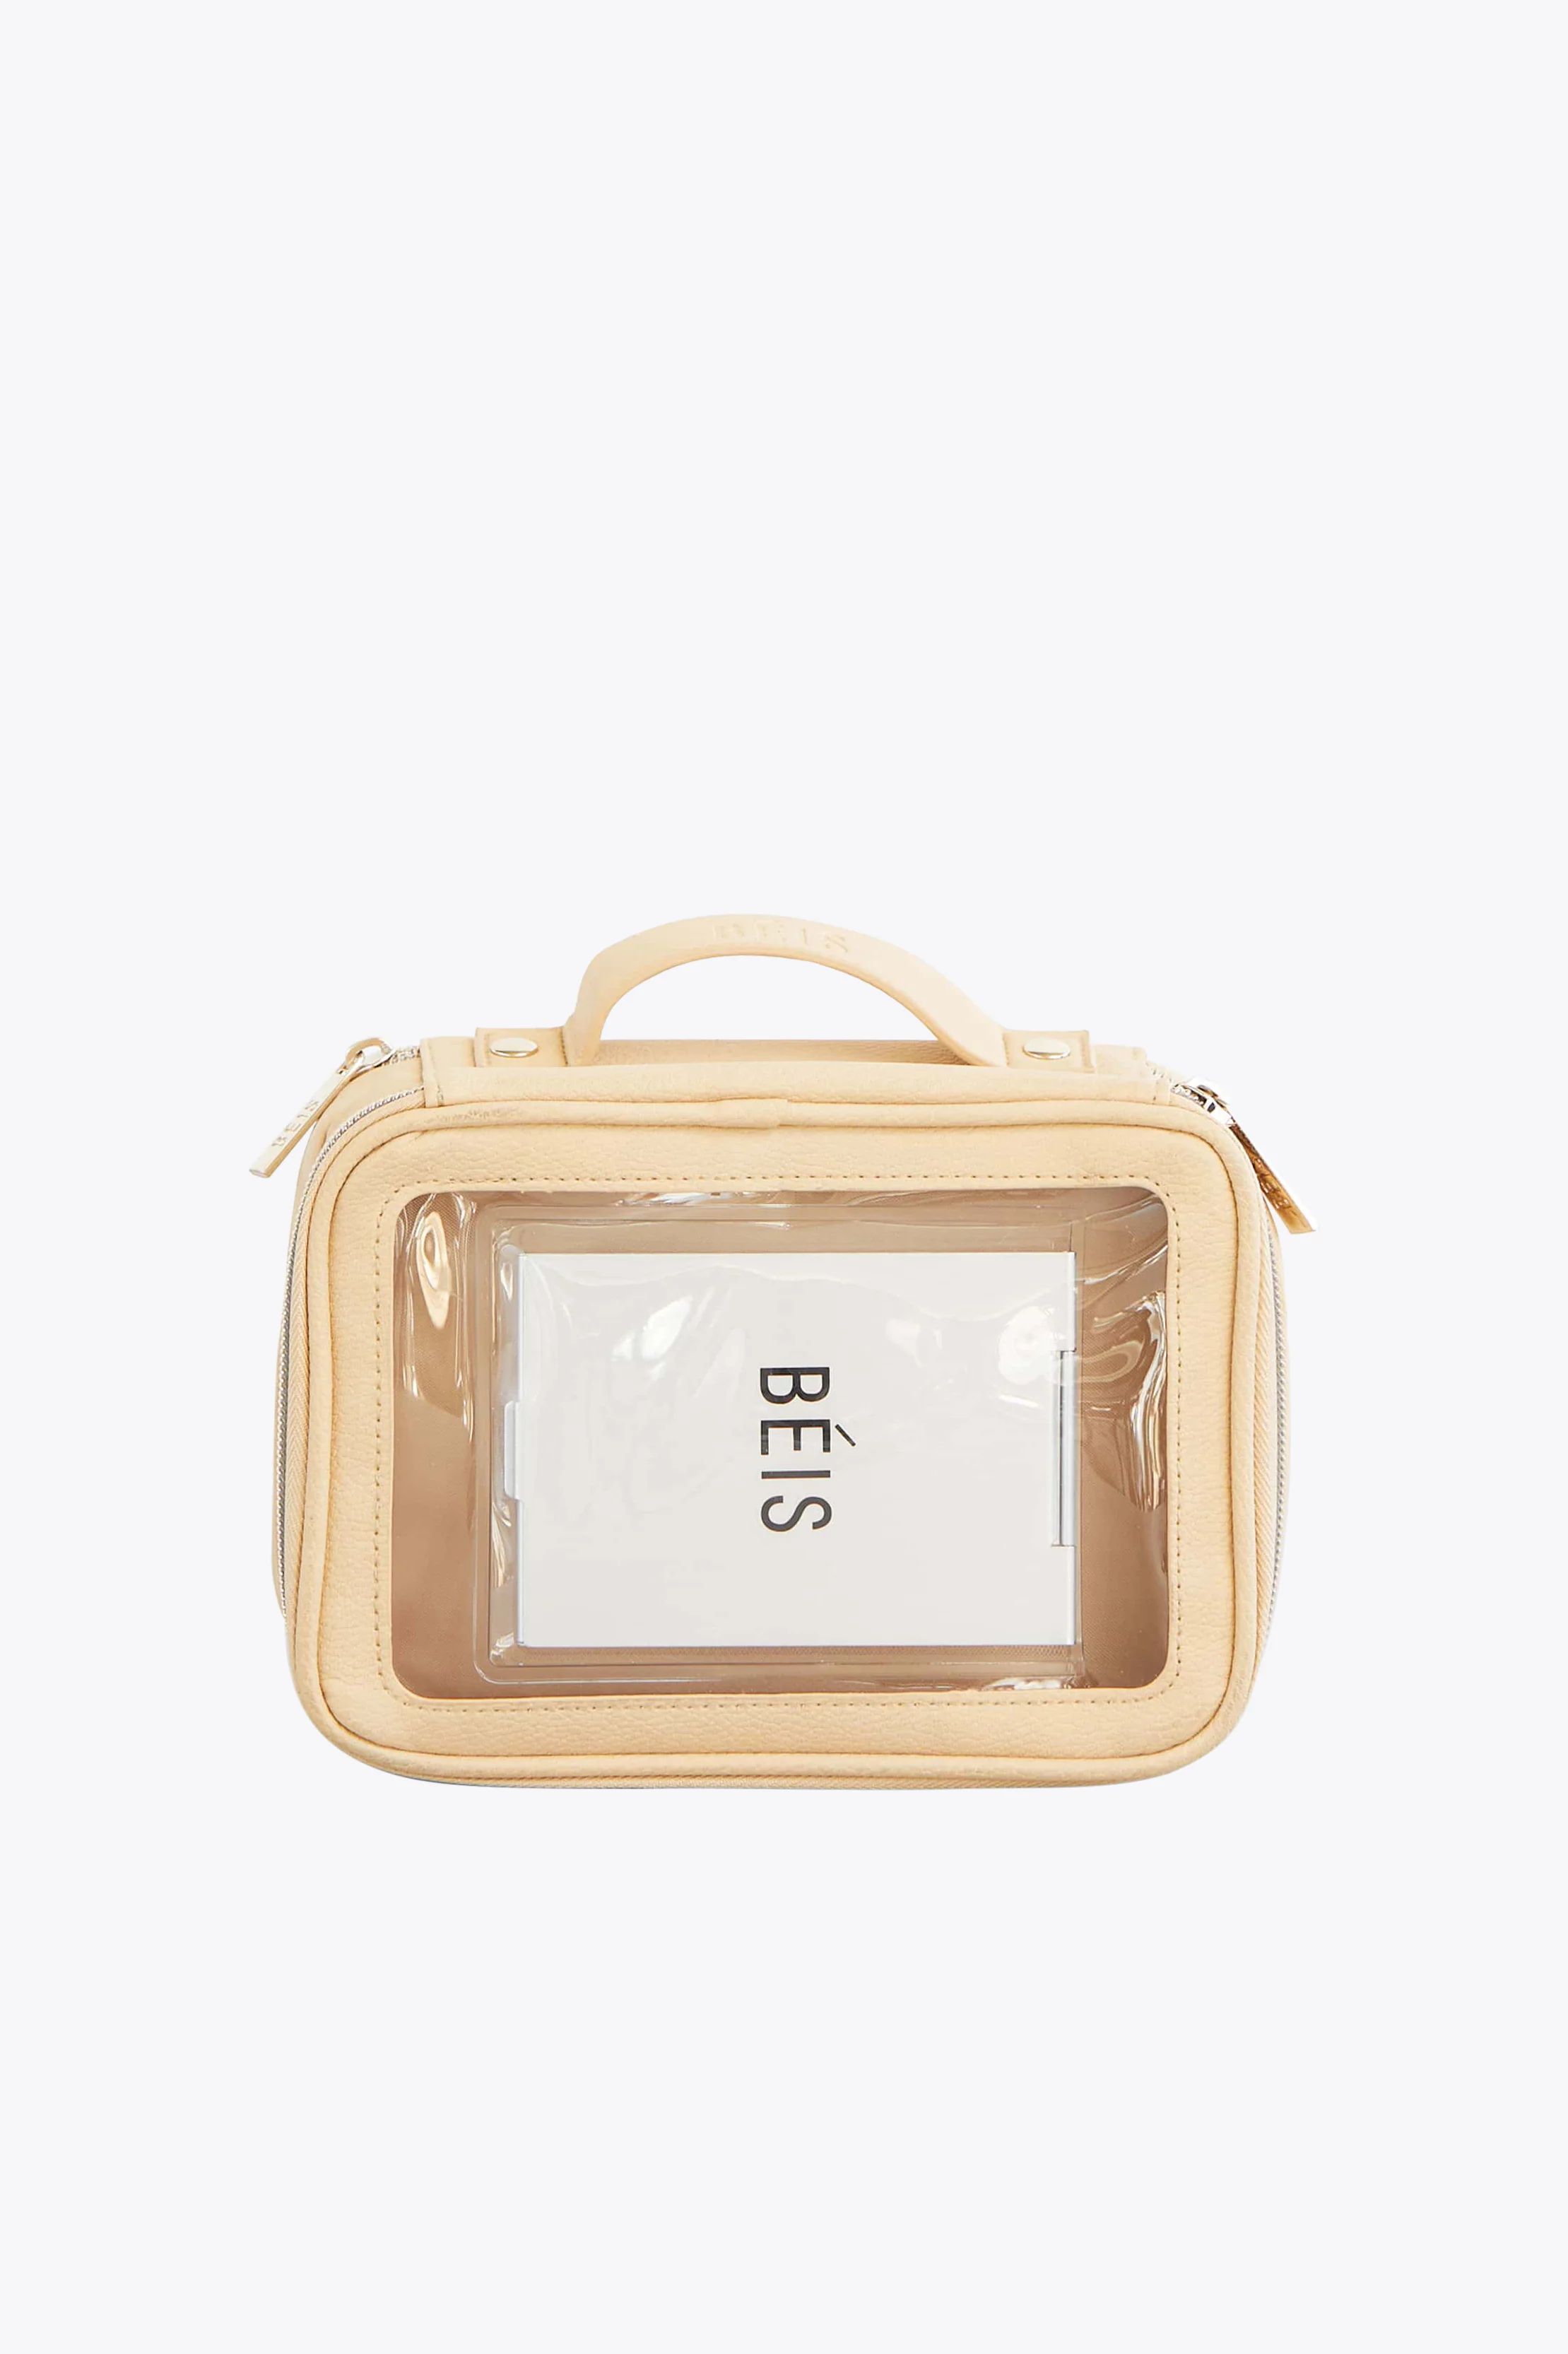 The On The Go Essential Case in Beige | BÉIS Travel